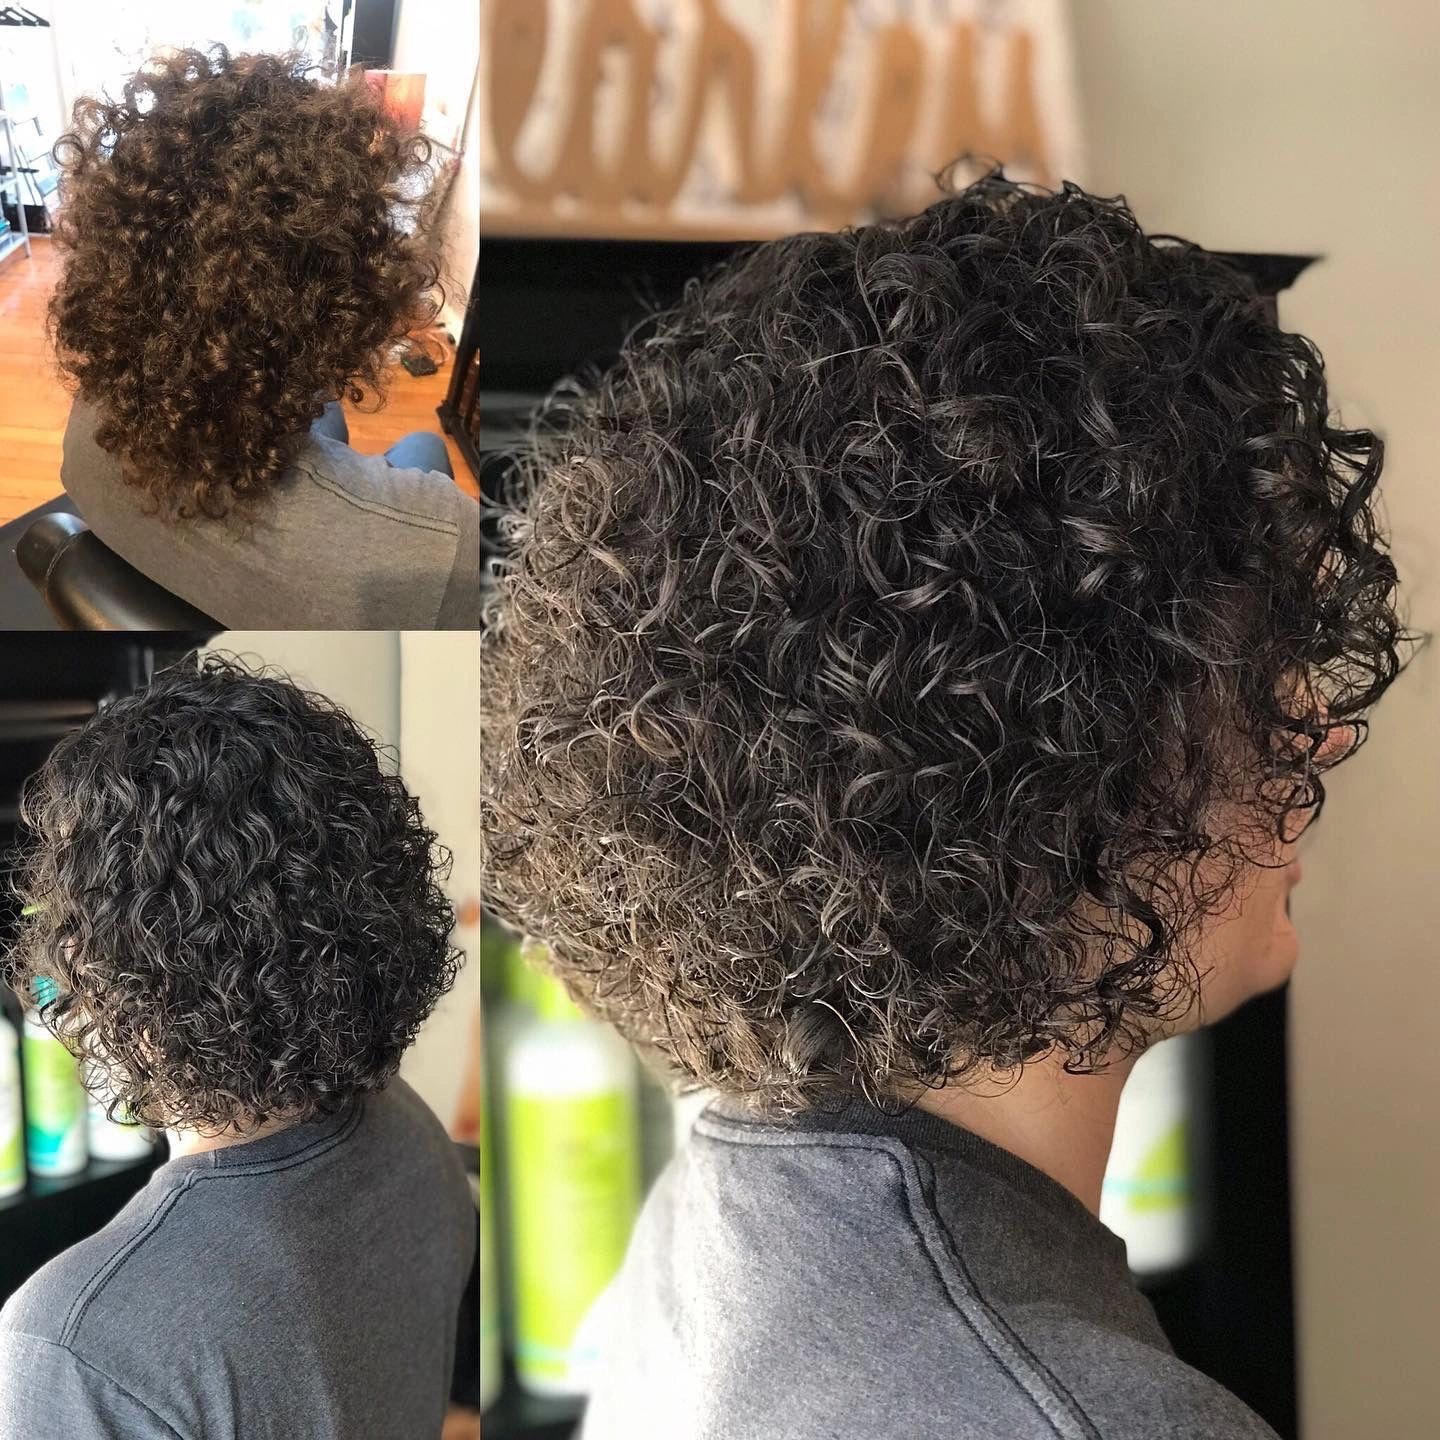 Perfect before and after pictures of the Deva cut.